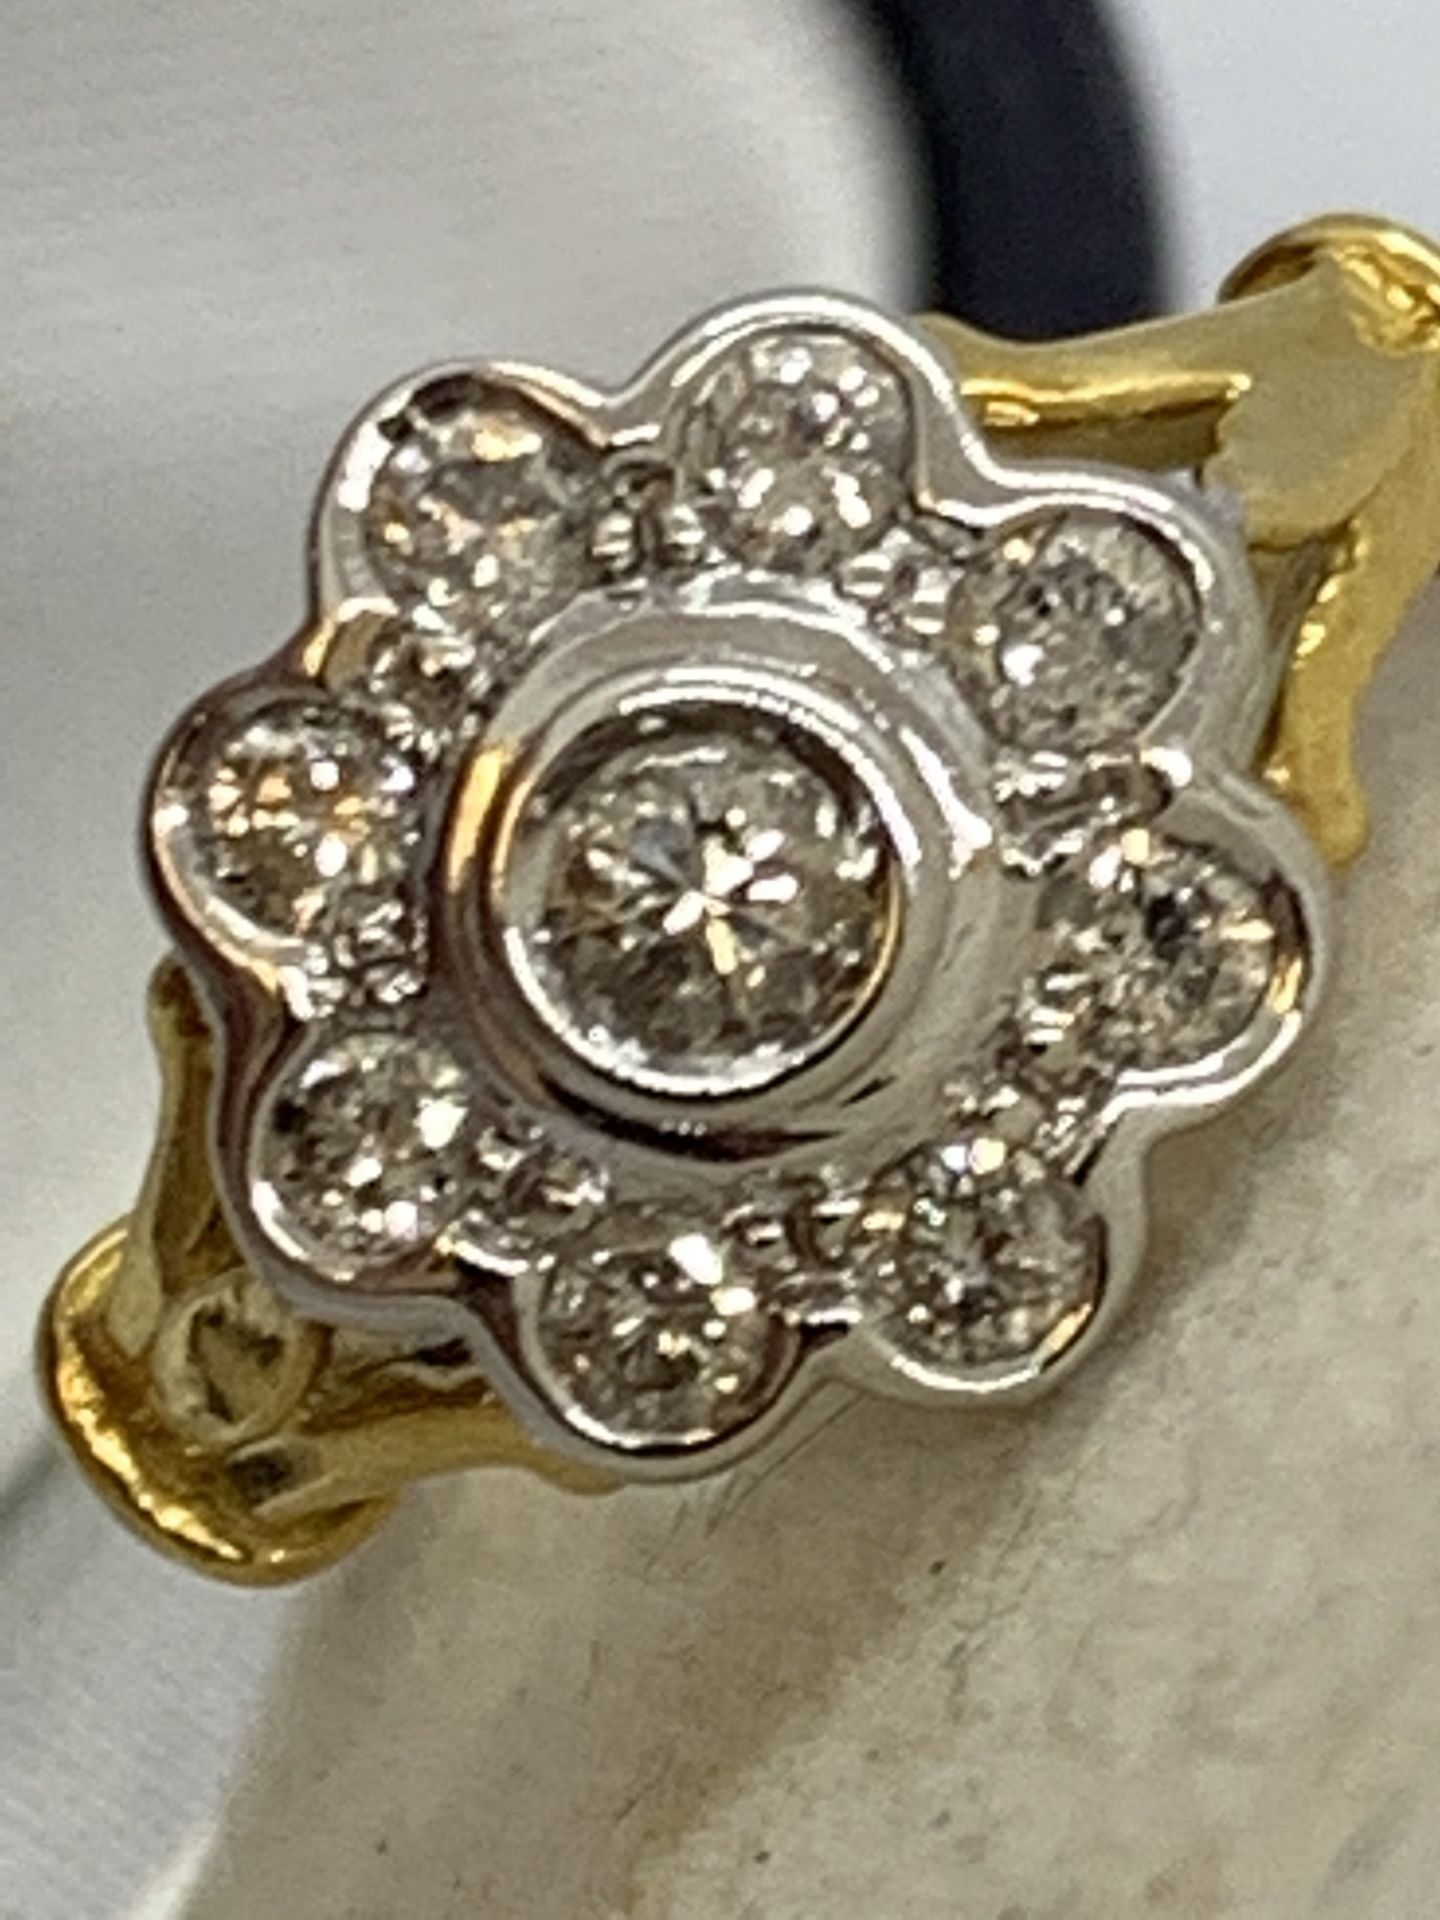 DIAMOND DAISY RING IN 18ct GOLD - 4.1g APPROX - SIZE J APPROX - Image 4 of 5